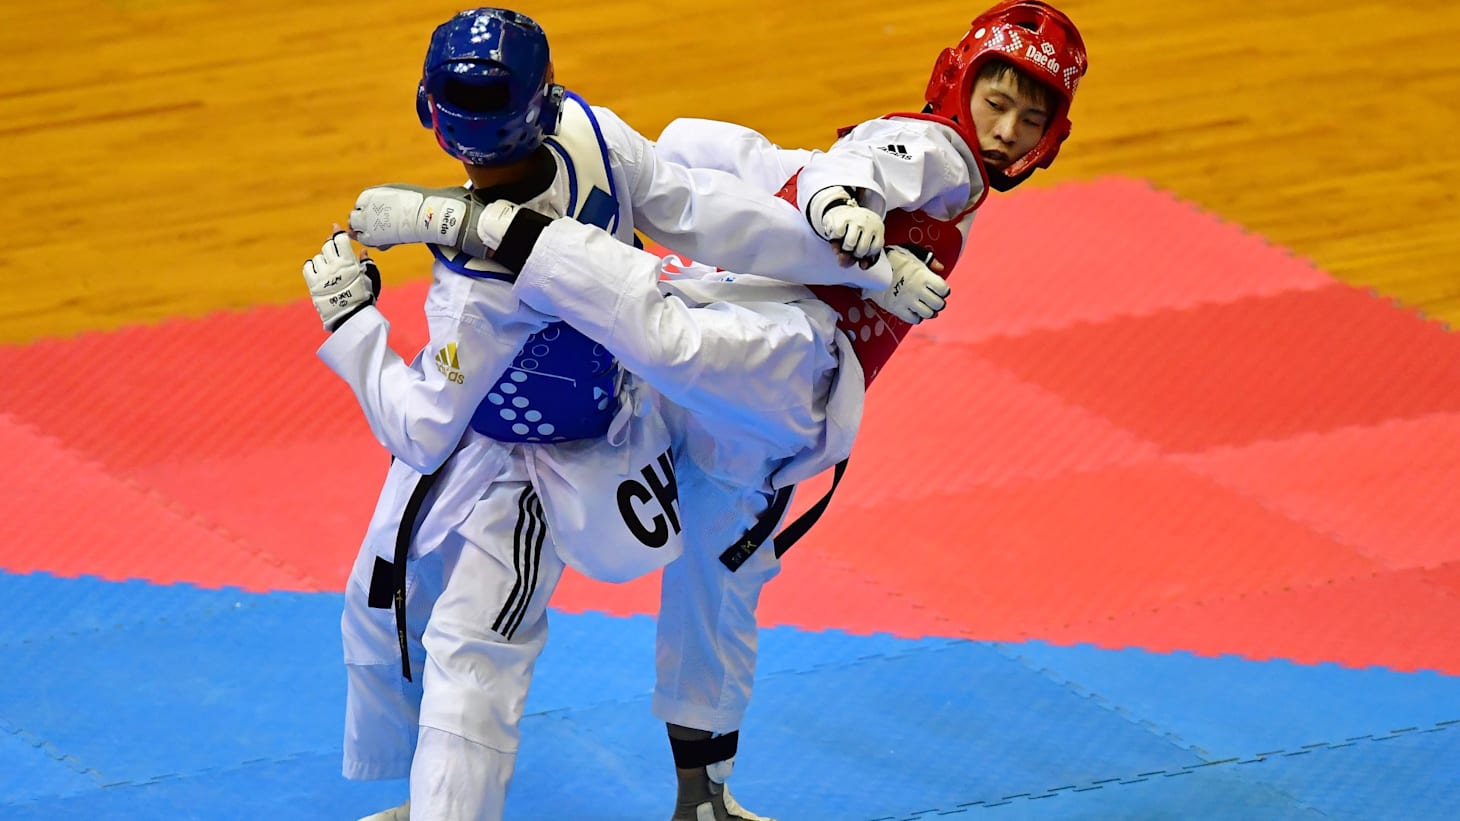 Know your sport: Olympic Taekwondo rules, scoring and equipment